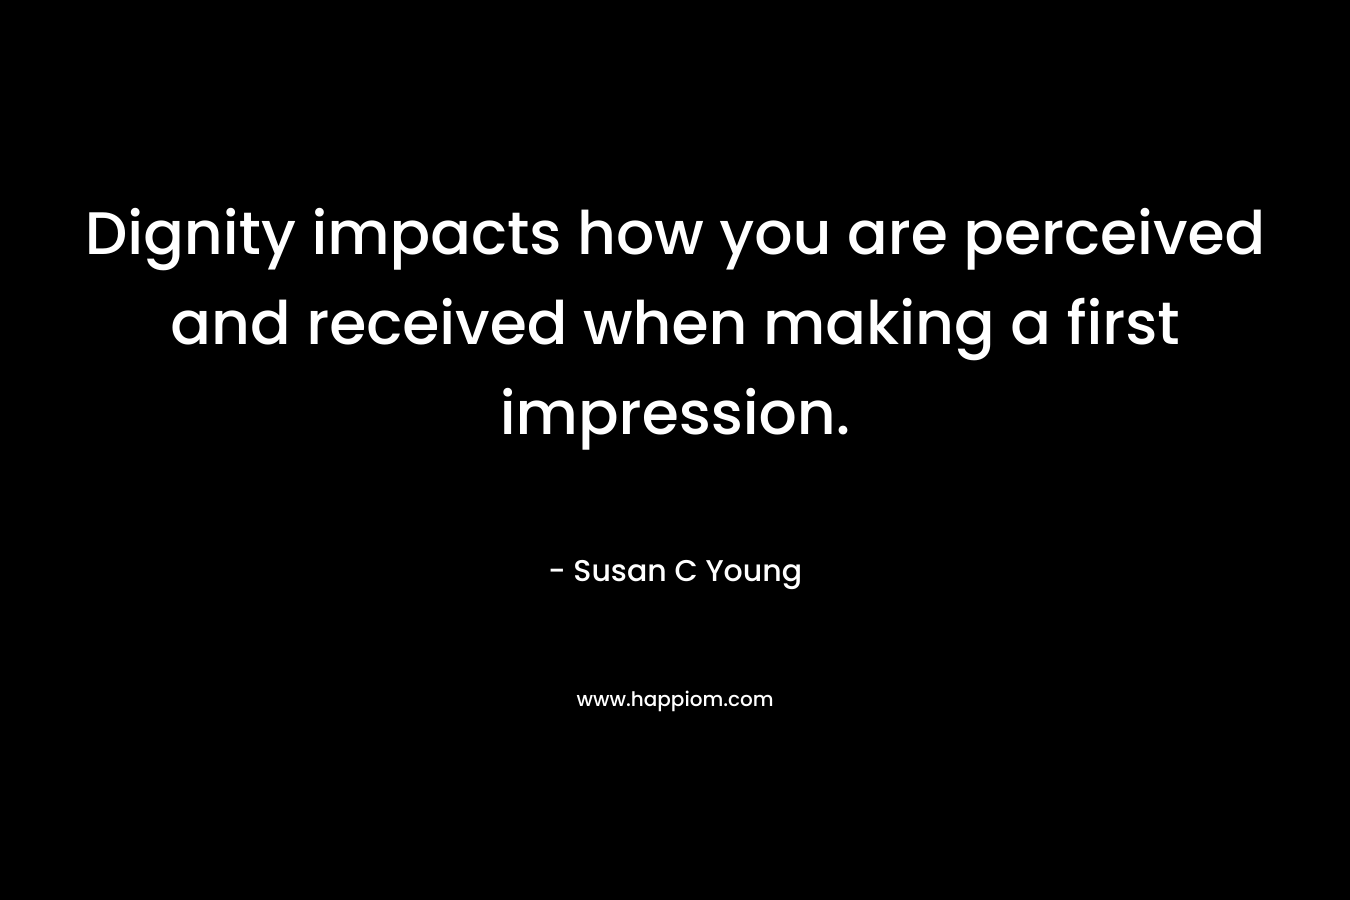 Dignity impacts how you are perceived and received when making a first impression. – Susan C Young